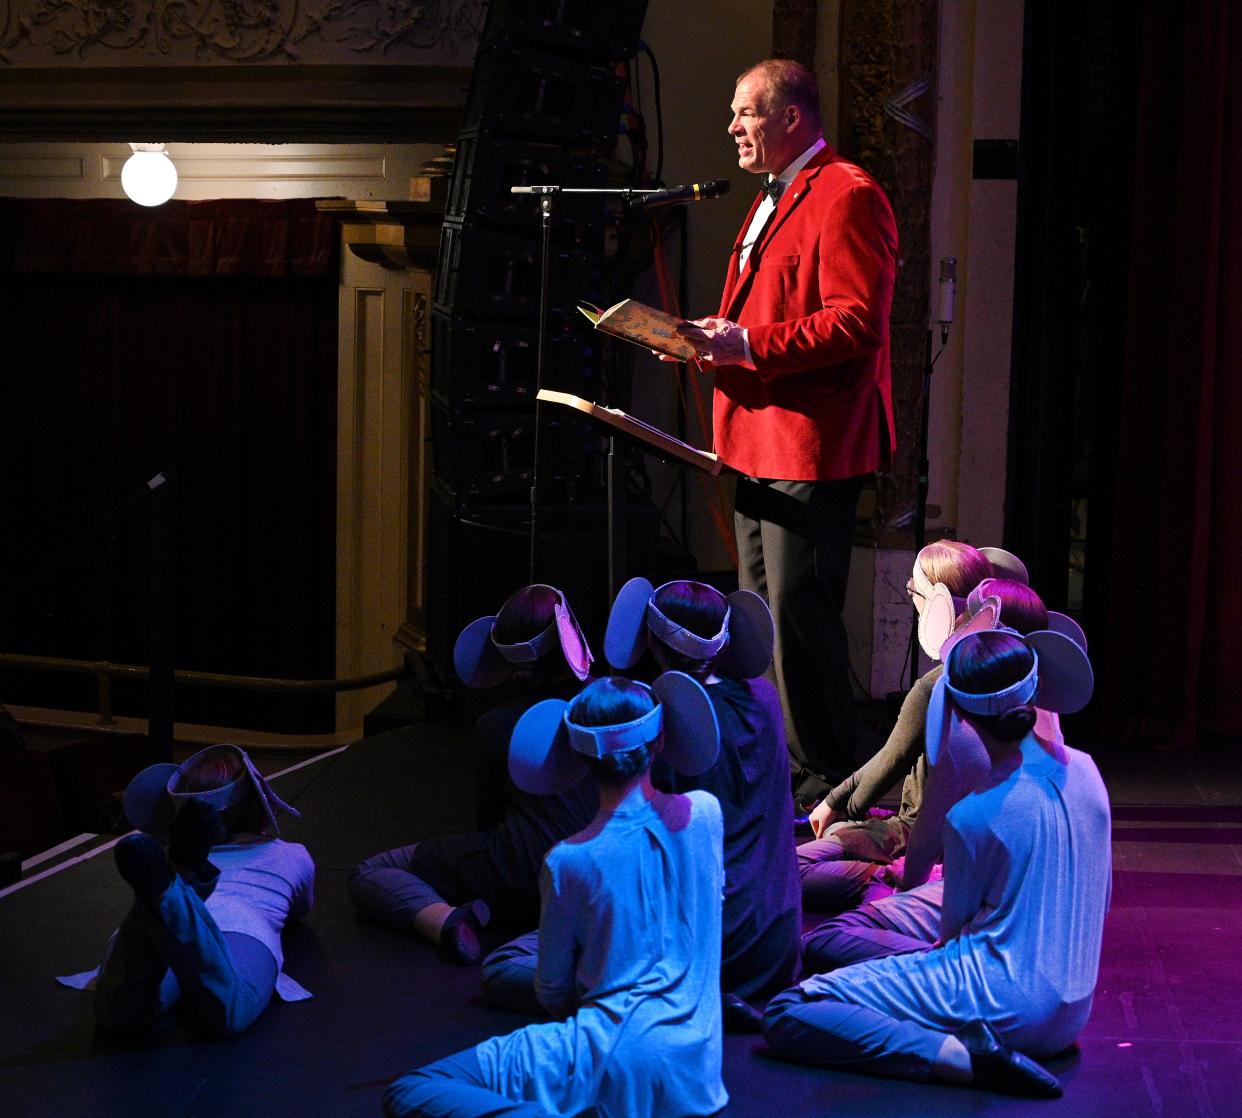 Knox County Mayor Glenn Jacobs reads the story of Edward the Elephant at the 2023 Read City kickoff, “All Together Now,” presented by the Knox County Library at the Historic Bijou Theater on Jan. 24.